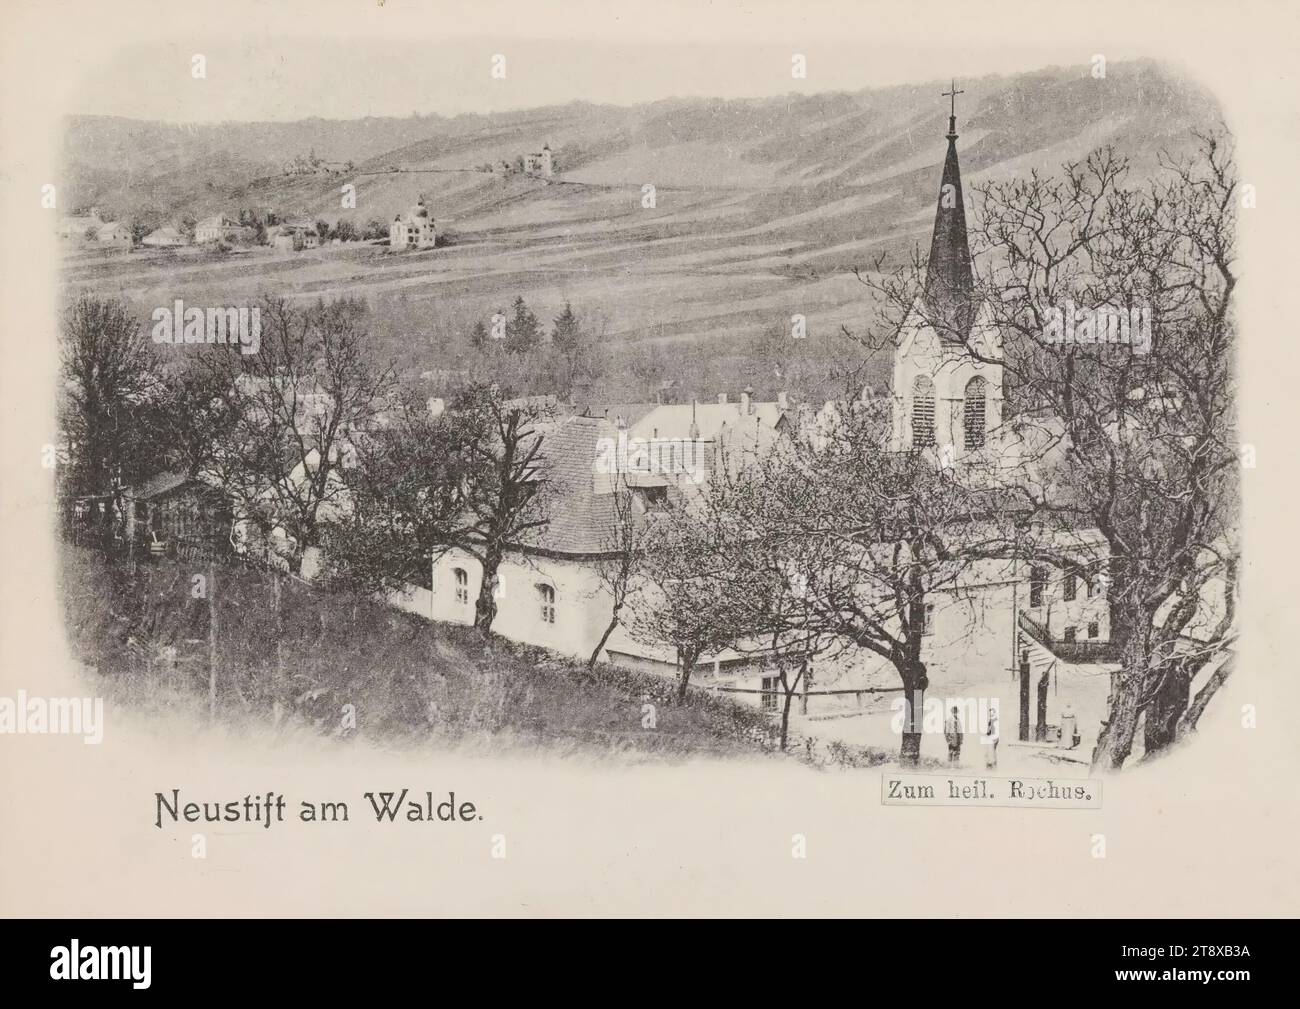 19th, Panorama of Neustift am Walde, with Neustifter church, picture postcard, Brüder Kohn KG (B. K. W. I.), manufacturer, date before 1905, cardboard, collotype, height×width 9×14 cm, Wienerwald, 19th district: Döbling, church (outside), view of the village, silhouette of the village, with people, Neustift am Walde, Neustifter church, The Vienna Collection Stock Photo